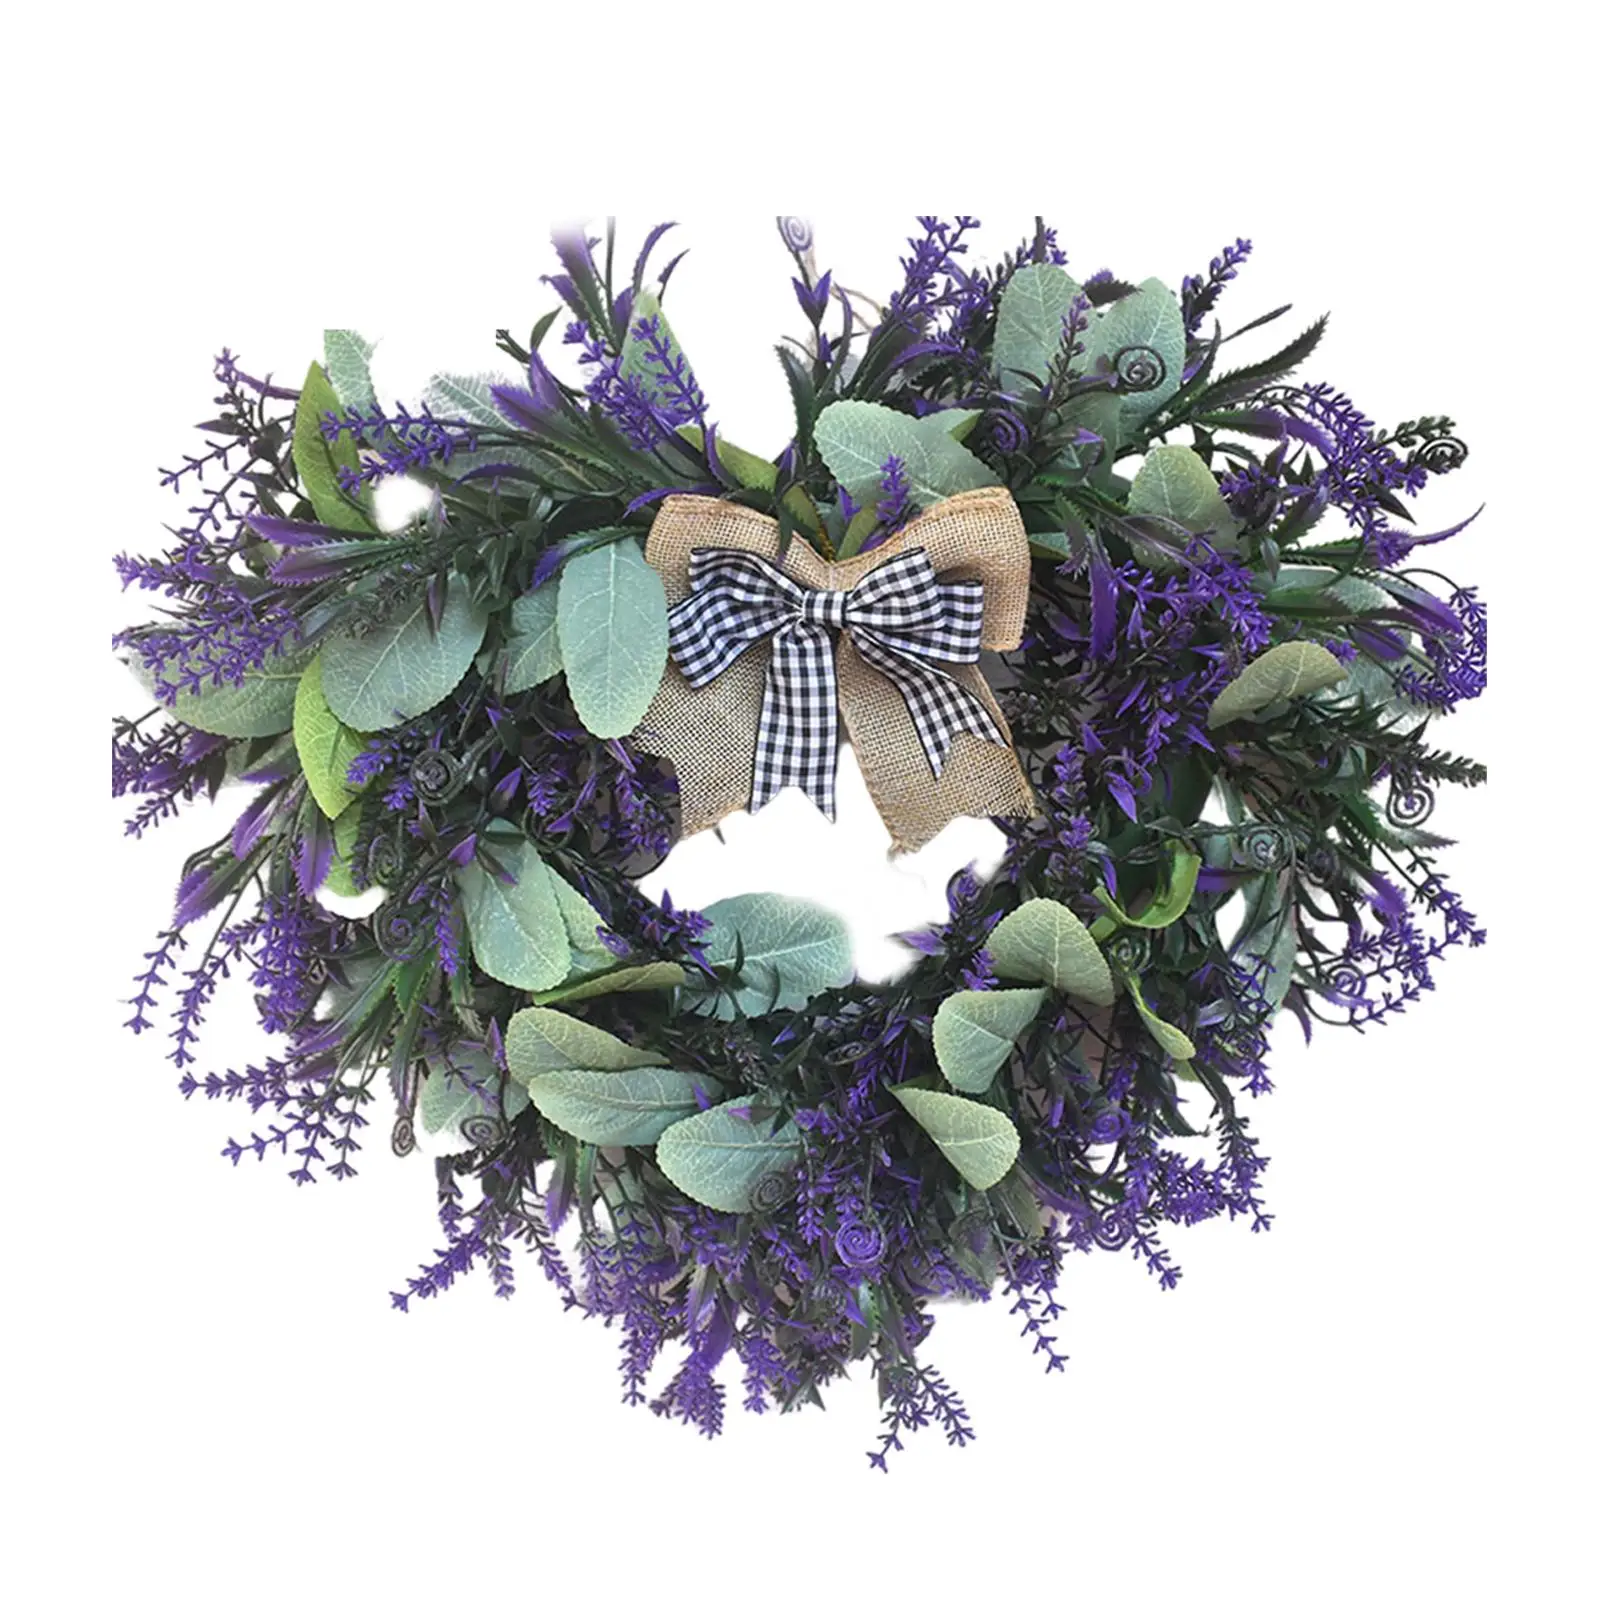 Large Lavender Wreath Flower Farmhouse Garland Wreath Front Door Wall Hanging for Wedding Wreath Home Decor